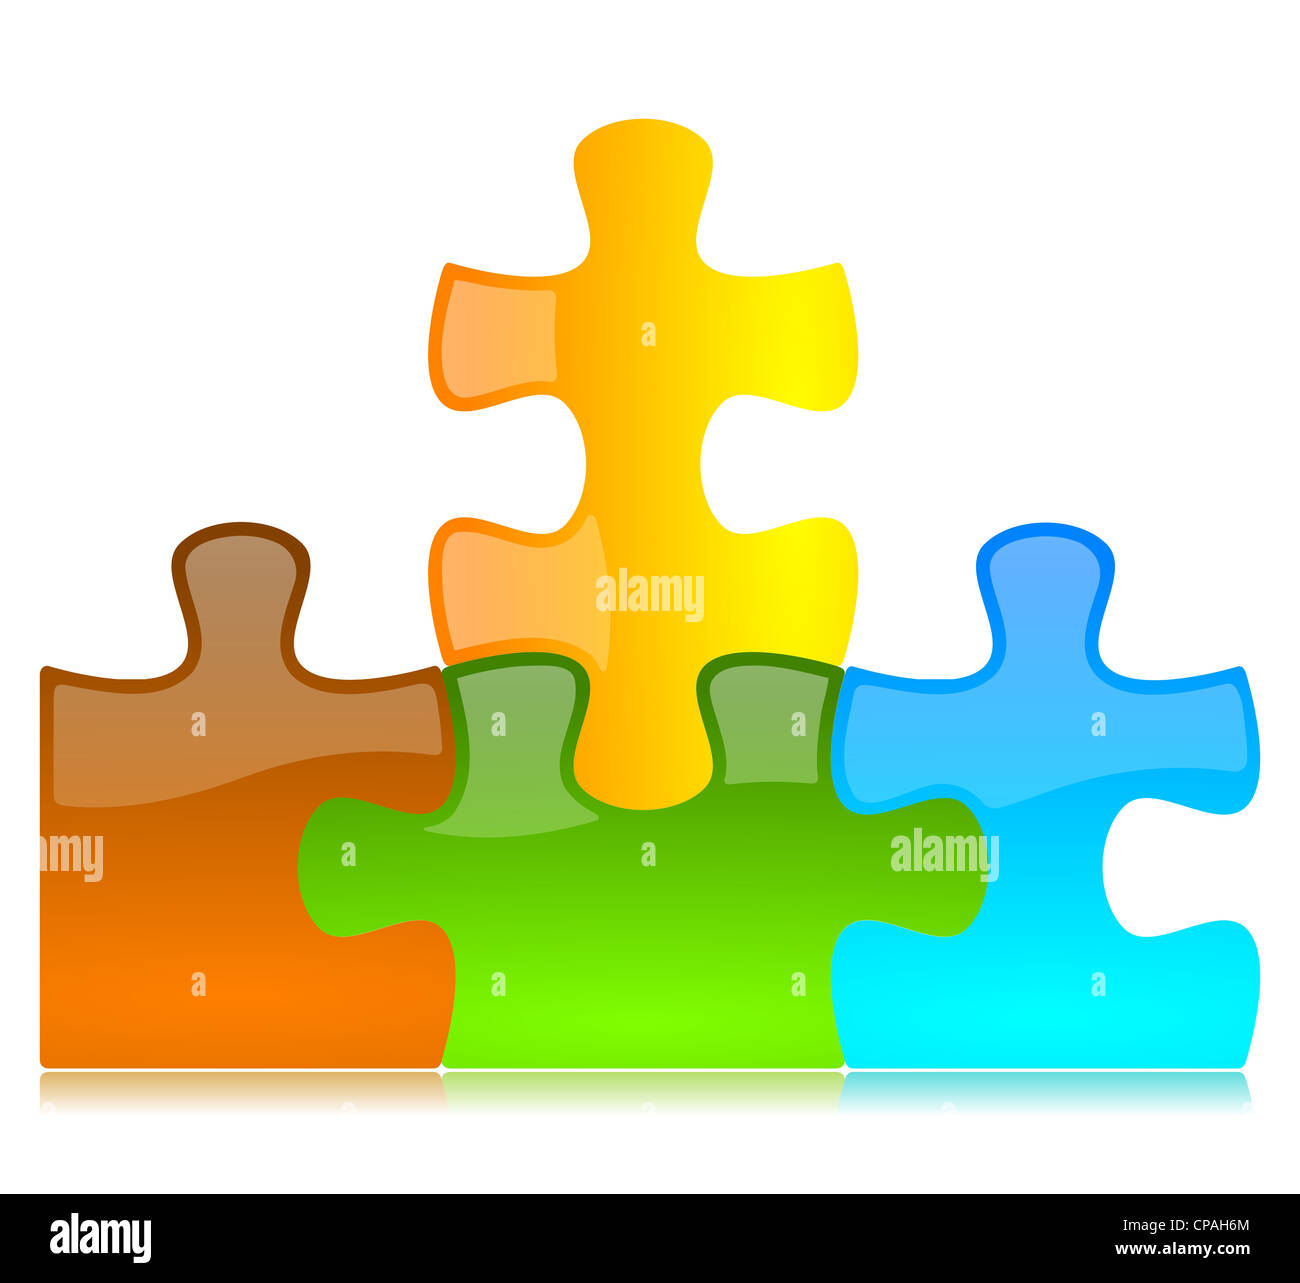 Glossy red, green, blue, yellow combined Colored Puzzle Pieces Stock Photo